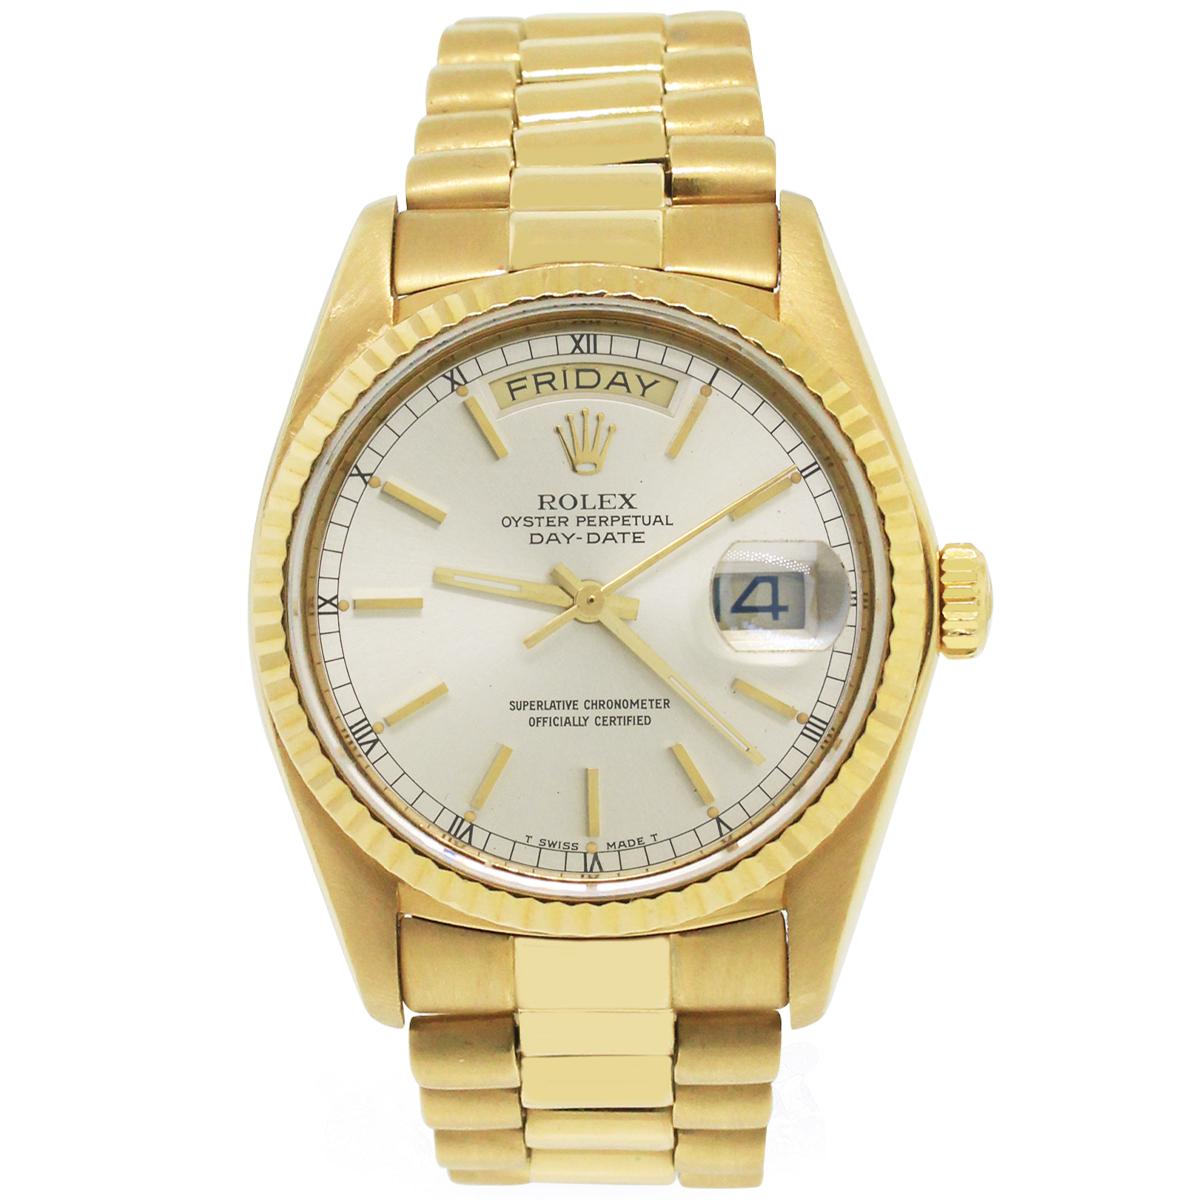 Brand: Rolex
MPN: 18038
Model: Day-date
Case Material: 18k Yellow Gold
Crystal: Crystal
Bezel: 18k Yellow Gold Fixed fluted bezel
Dial: Silver dial with yellow gold hour markers and hands. Date is displayed at 3 o' clock. Day is displayed at 12 o'